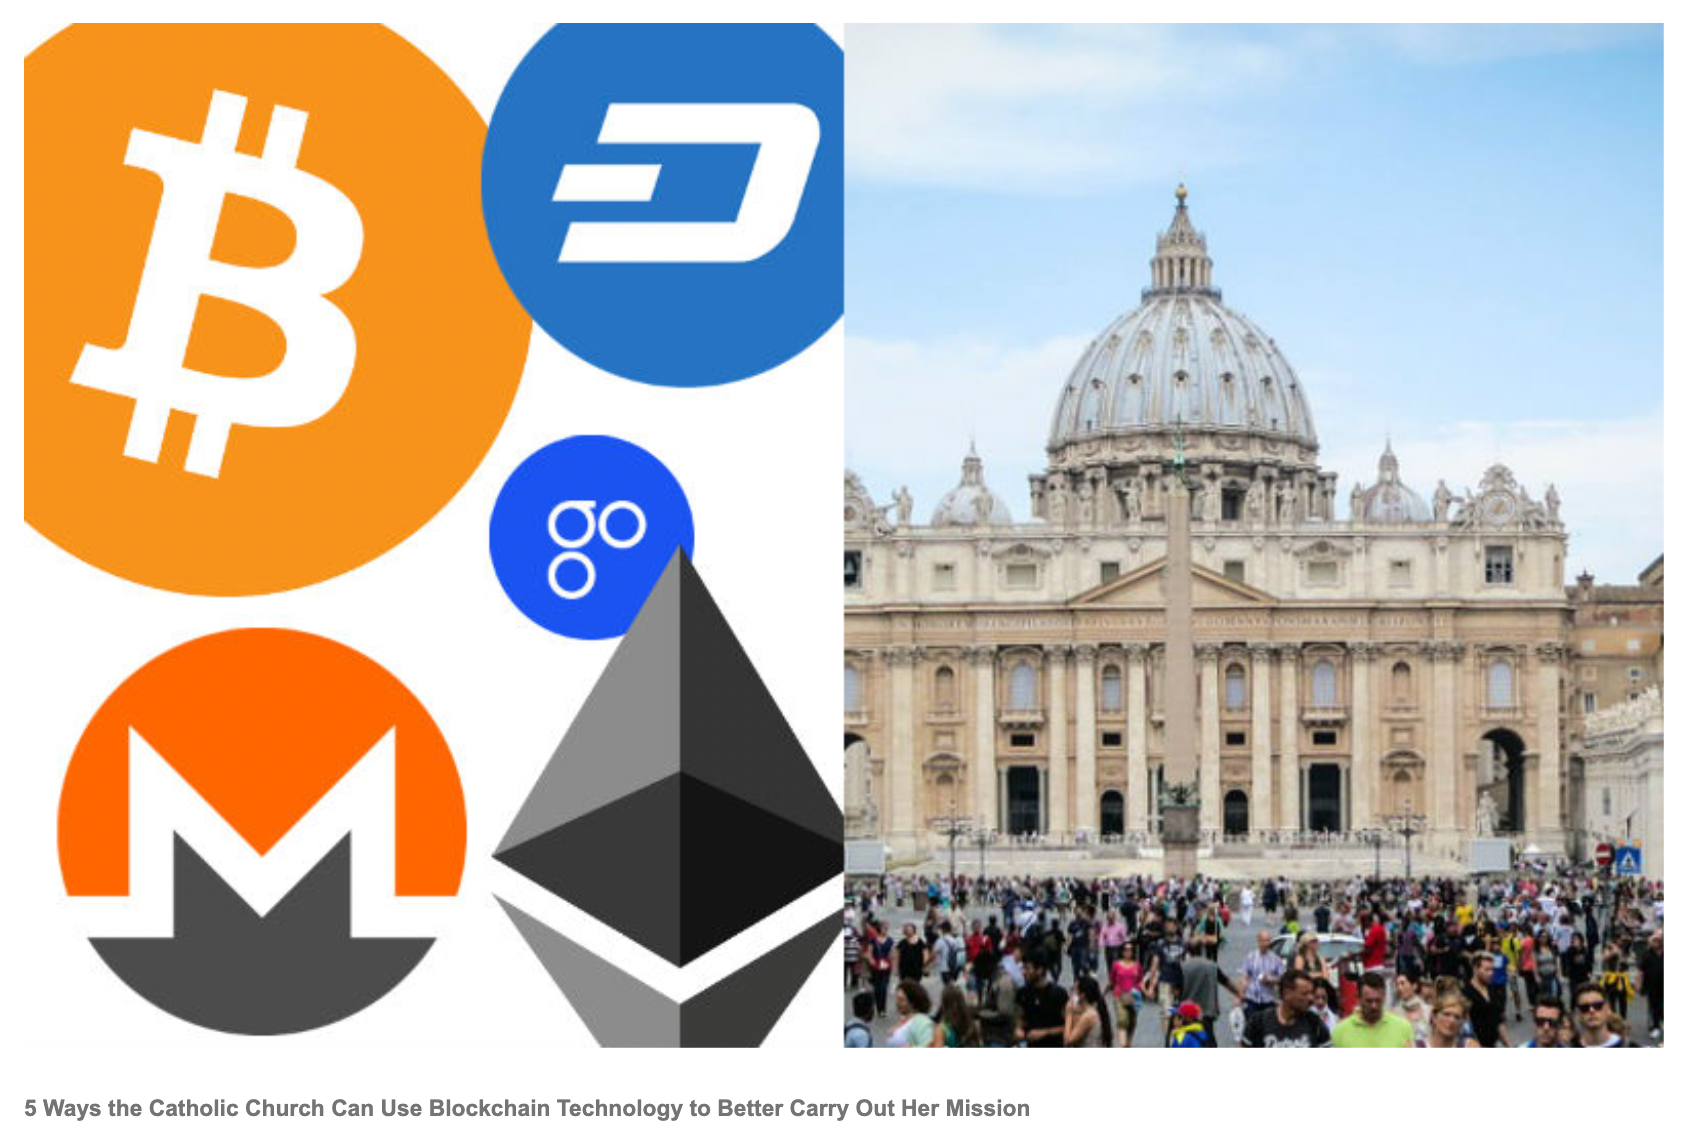 An image accompanying the text '5 Ways the Catholic Church Can Use Blockchain Technology to Better Carry Out Her Mission' on catholicblockchain.org. A screenshot by To The Moon